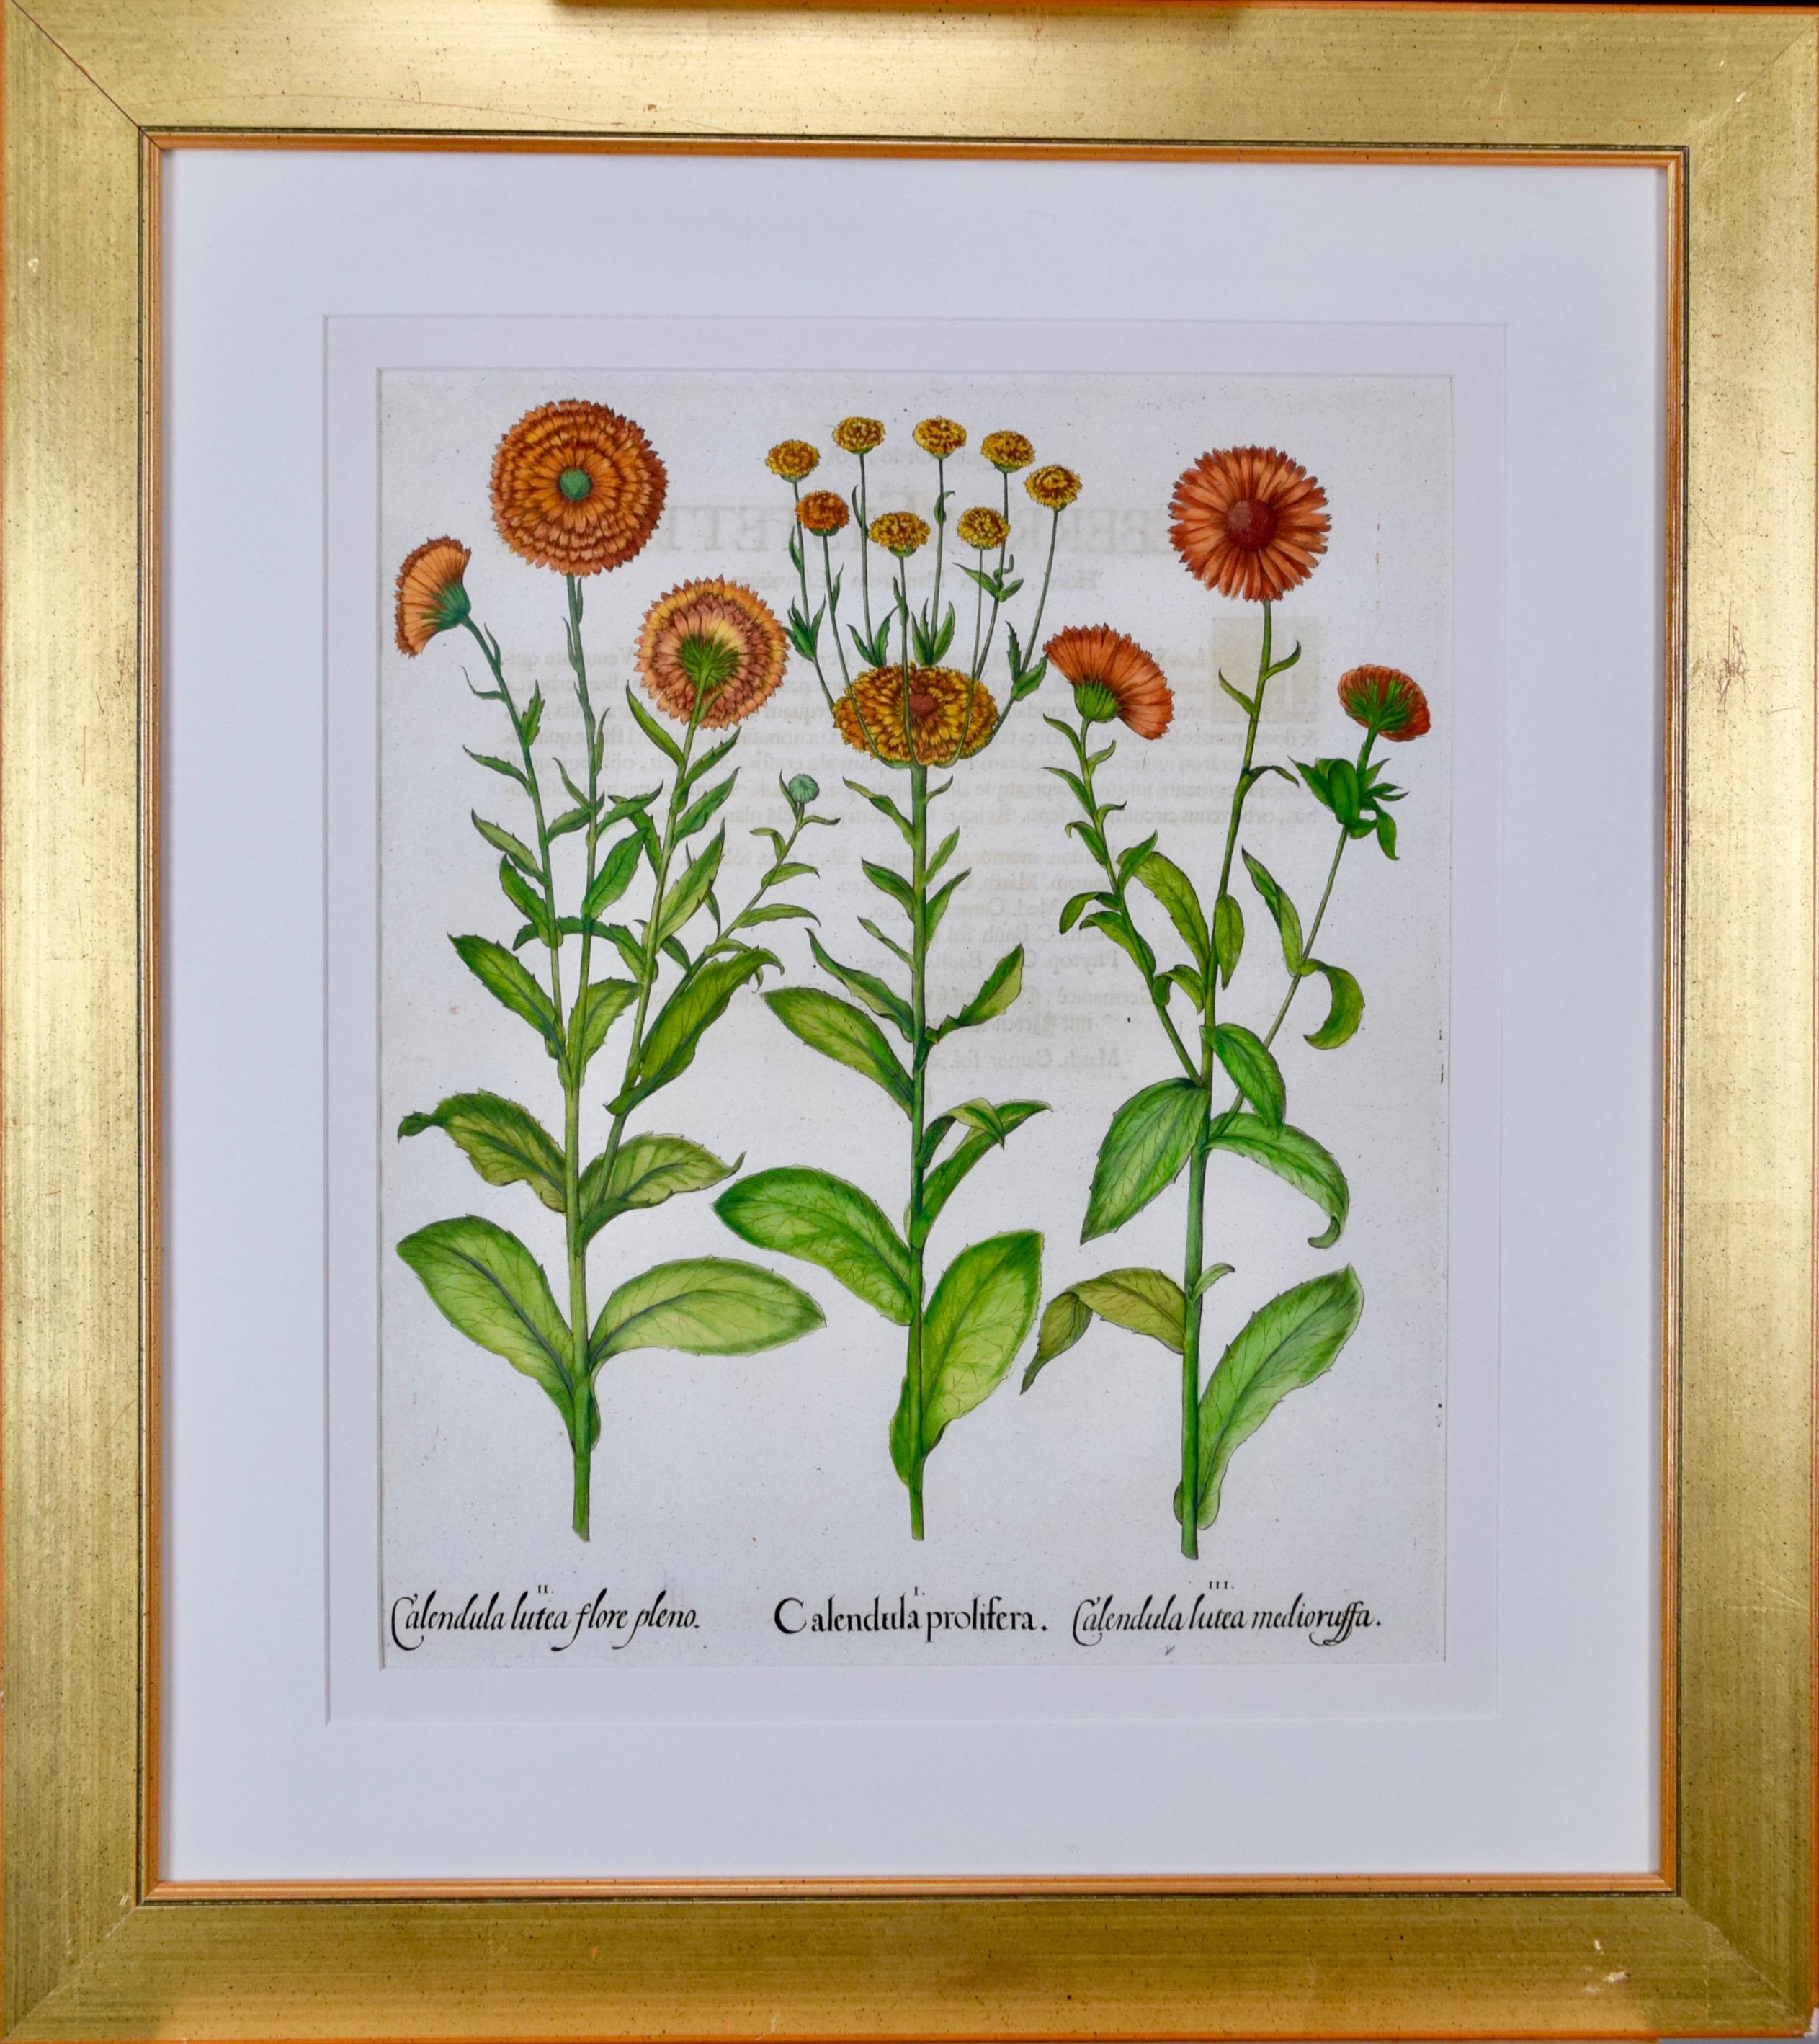 Calendula Flowers: An 18th Century Hand-colored Botanical Engraving by B. Besler